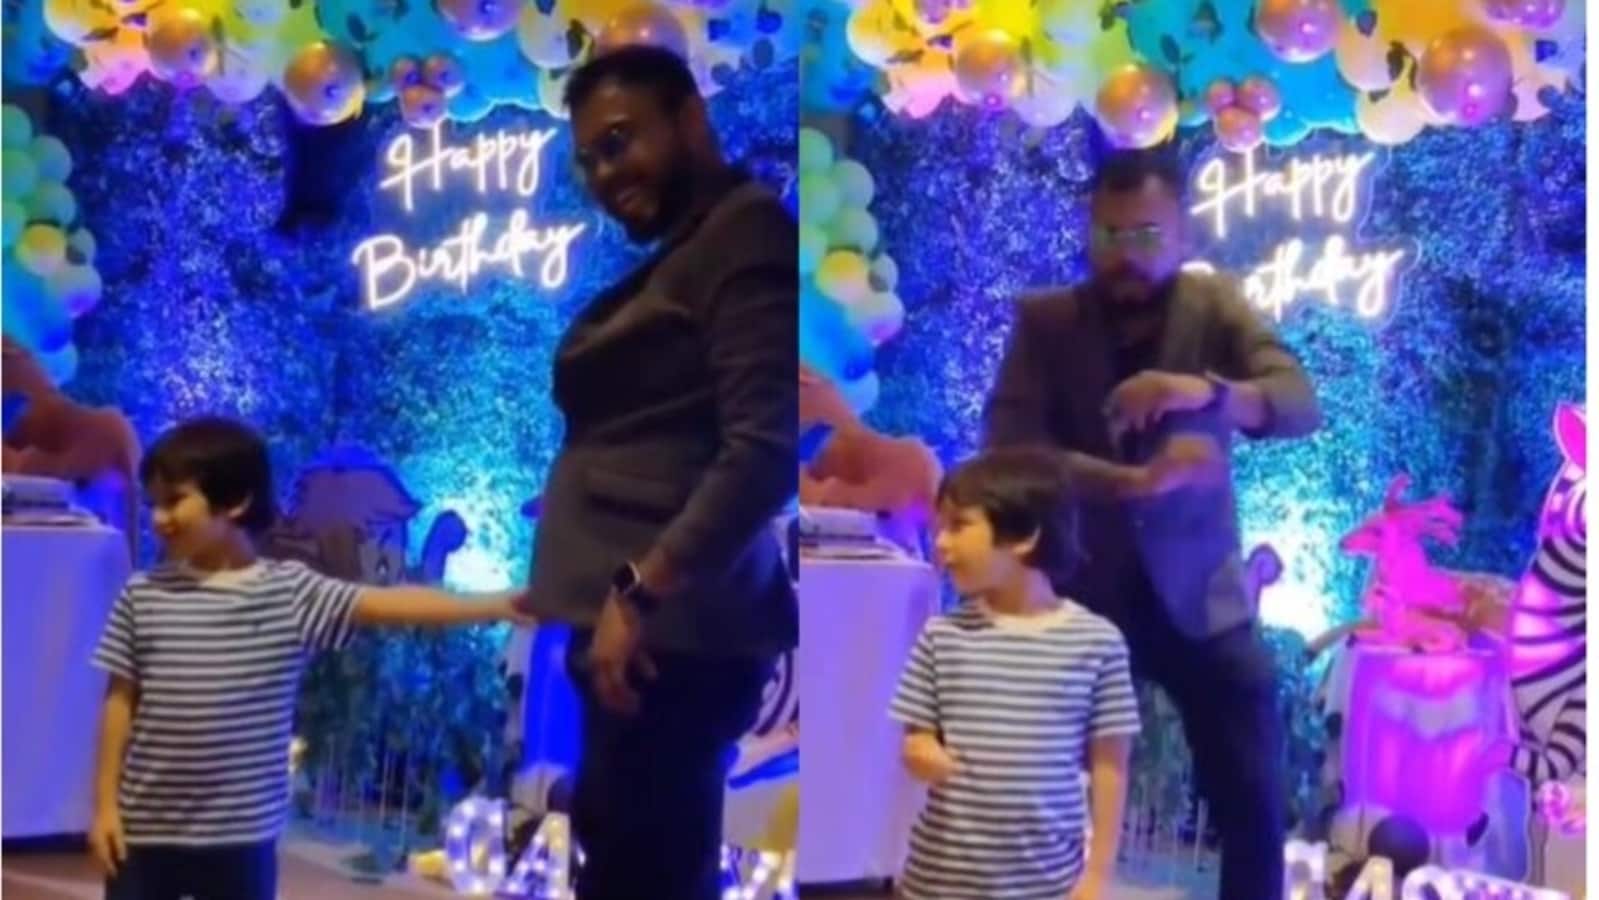 Uninterested Taimur Ali Khan takes part in magic show at friend’s birthday party, smiles as it ends. Watch